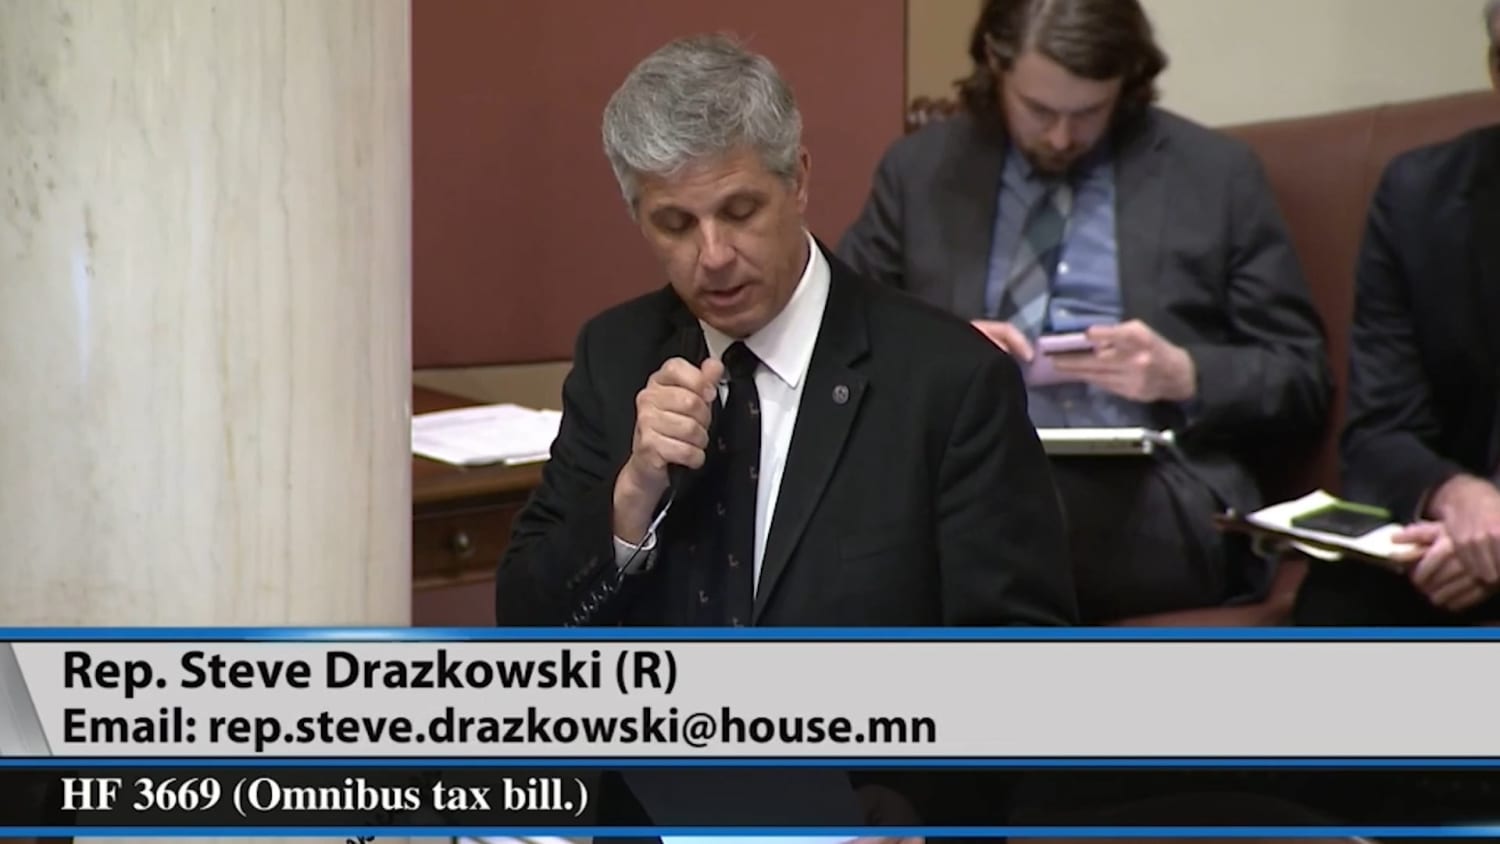 Minnesota state Rep. Steve Drazkowski (R) argues for abolishing early childhood education: "We should let parents raise their kids until they're five at least before government comes with a school bus, backs it up to the maternity ward room door and takes them to the government school."